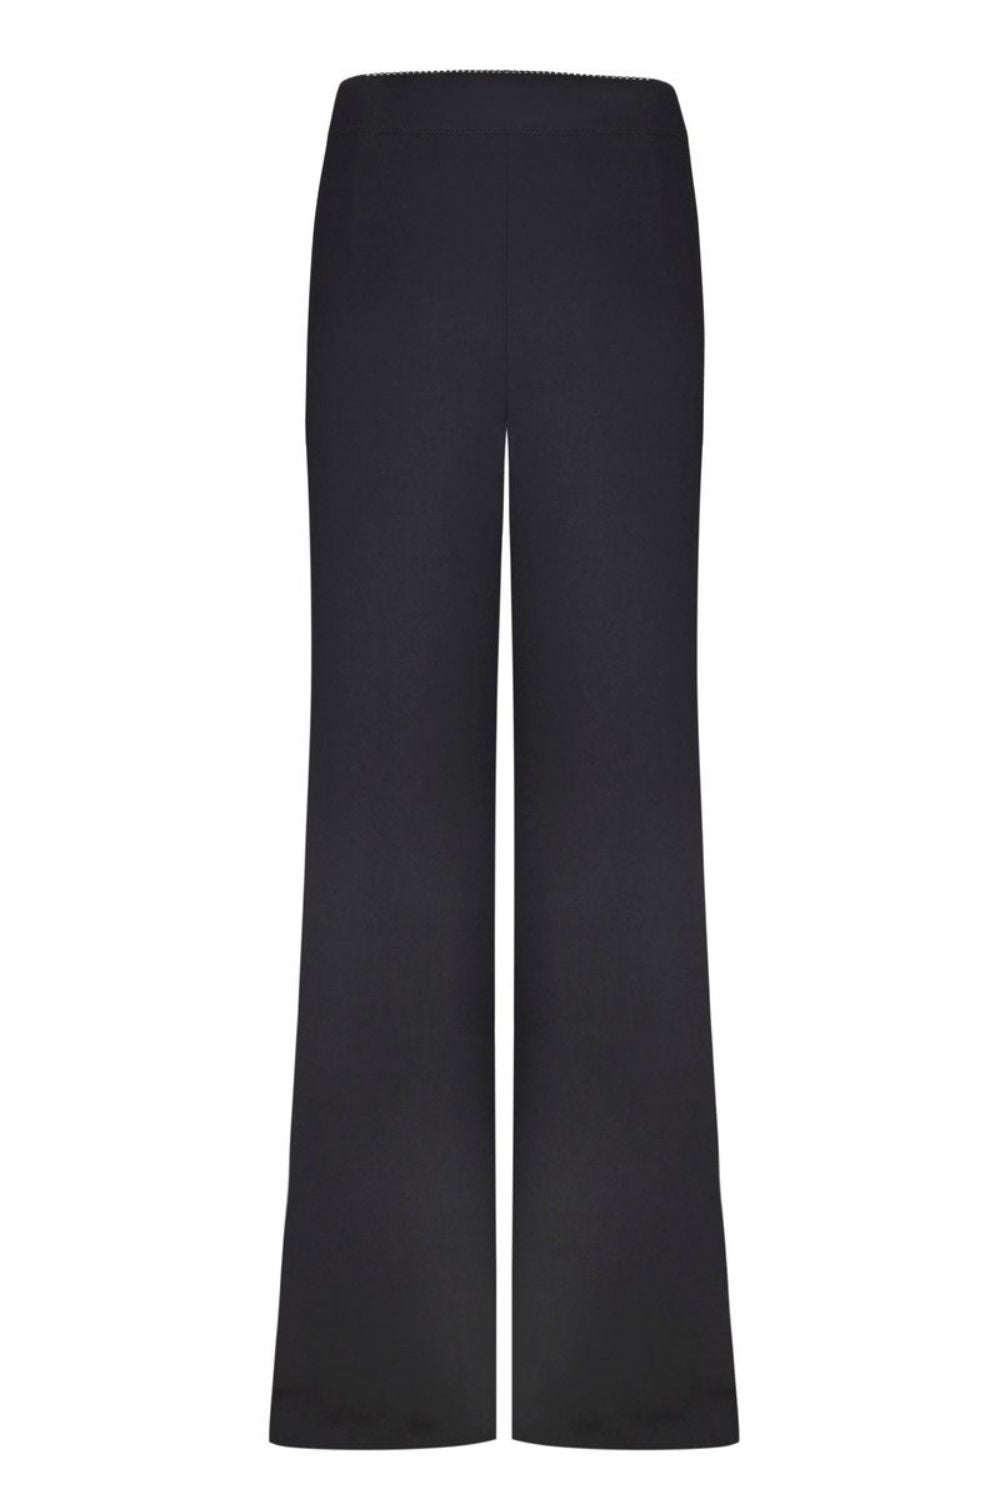 Black Wide Leg Trouser With Zipper At Front